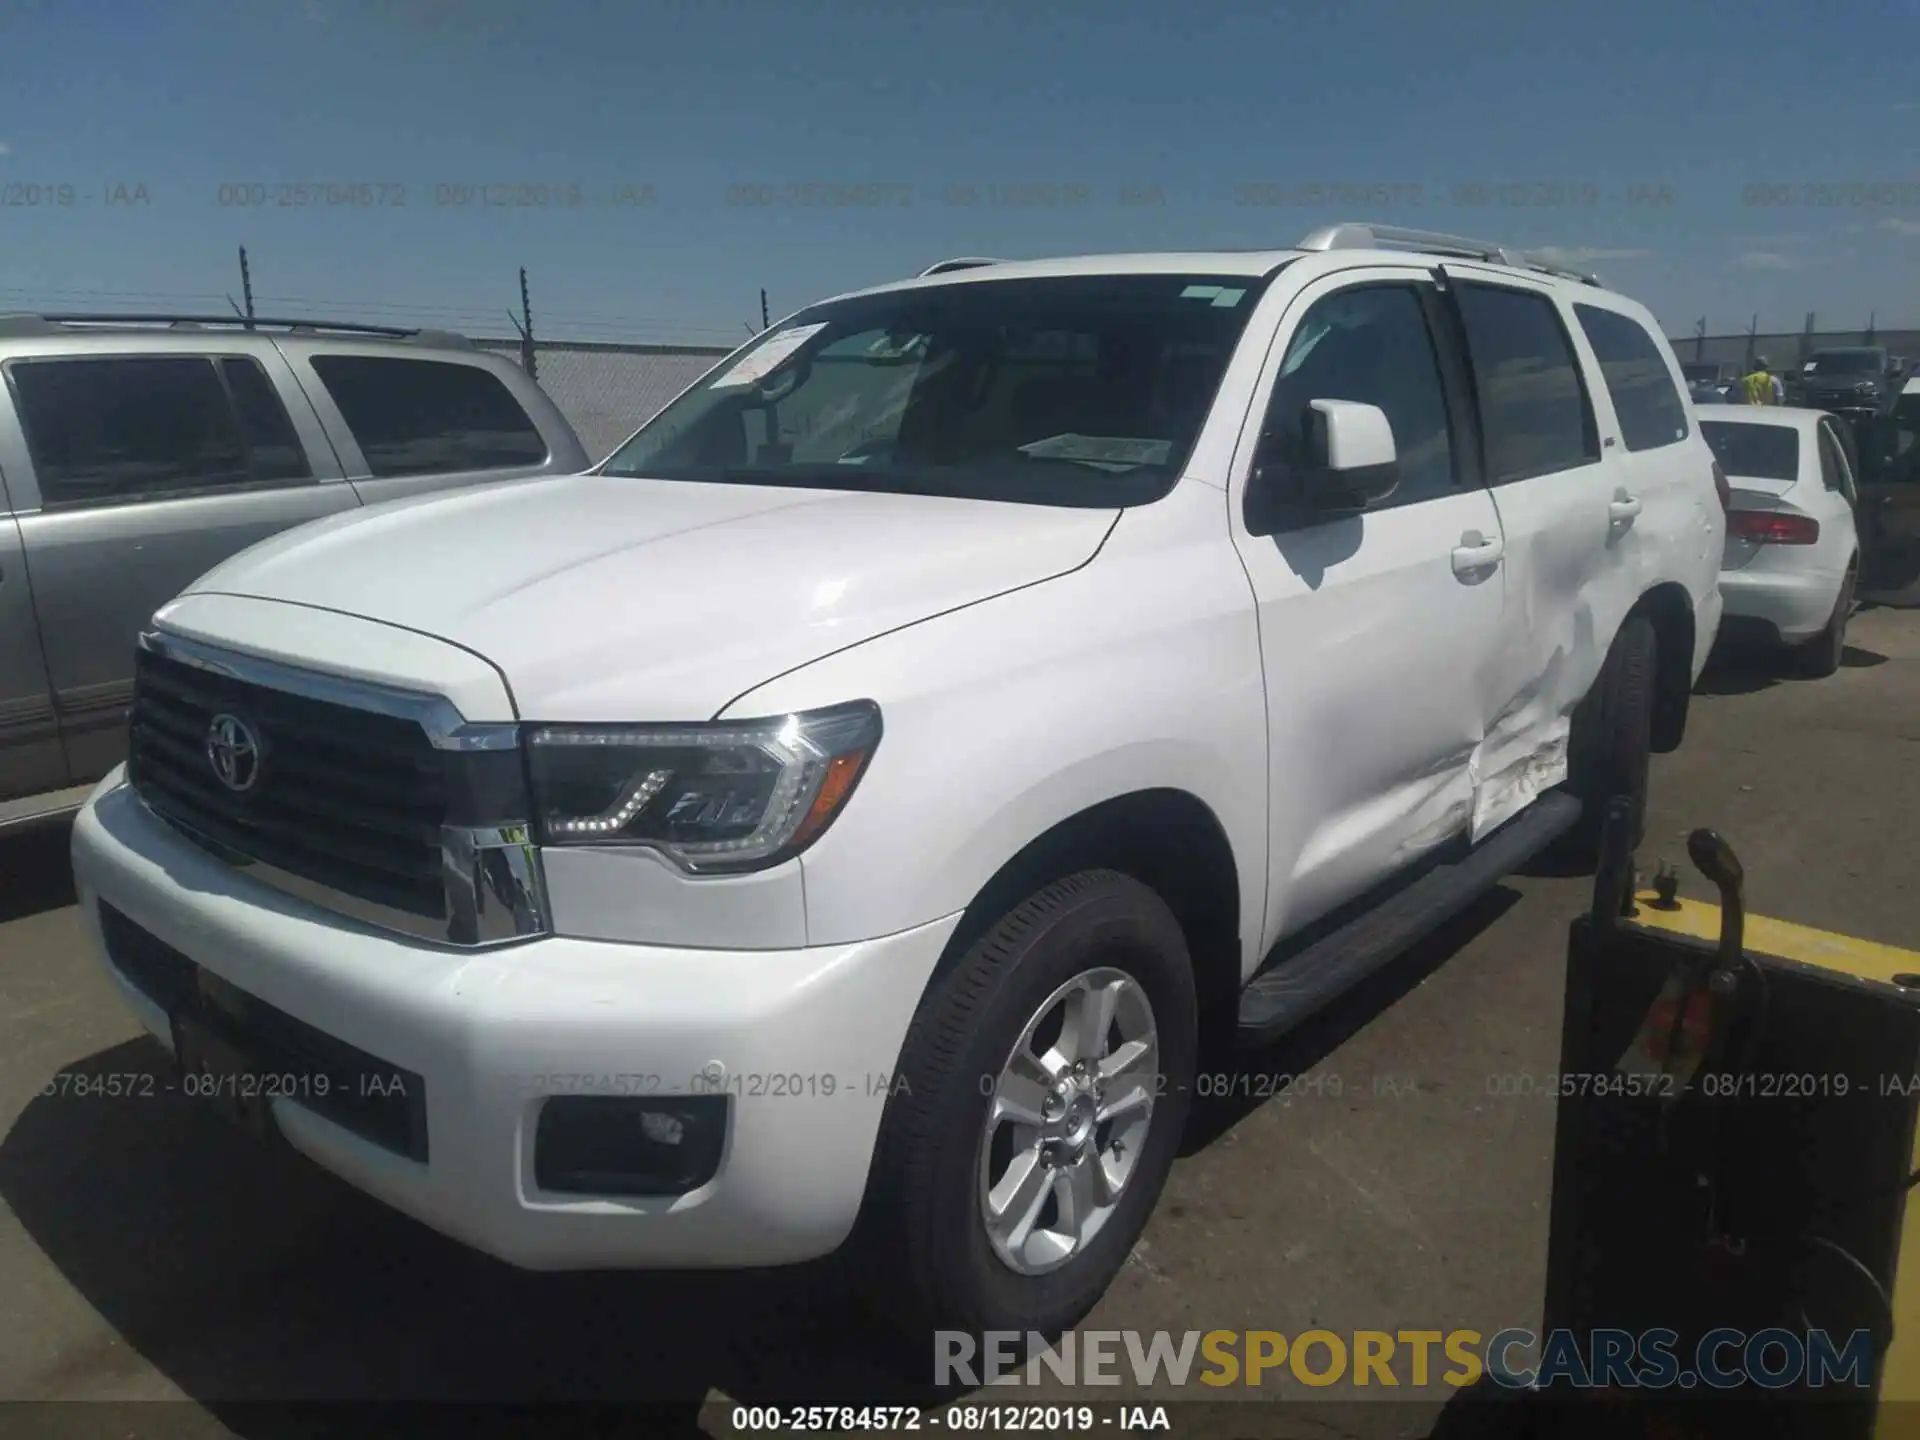 2 Photograph of a damaged car 5TDBY5G16KS168805 TOYOTA SEQUOIA 2019